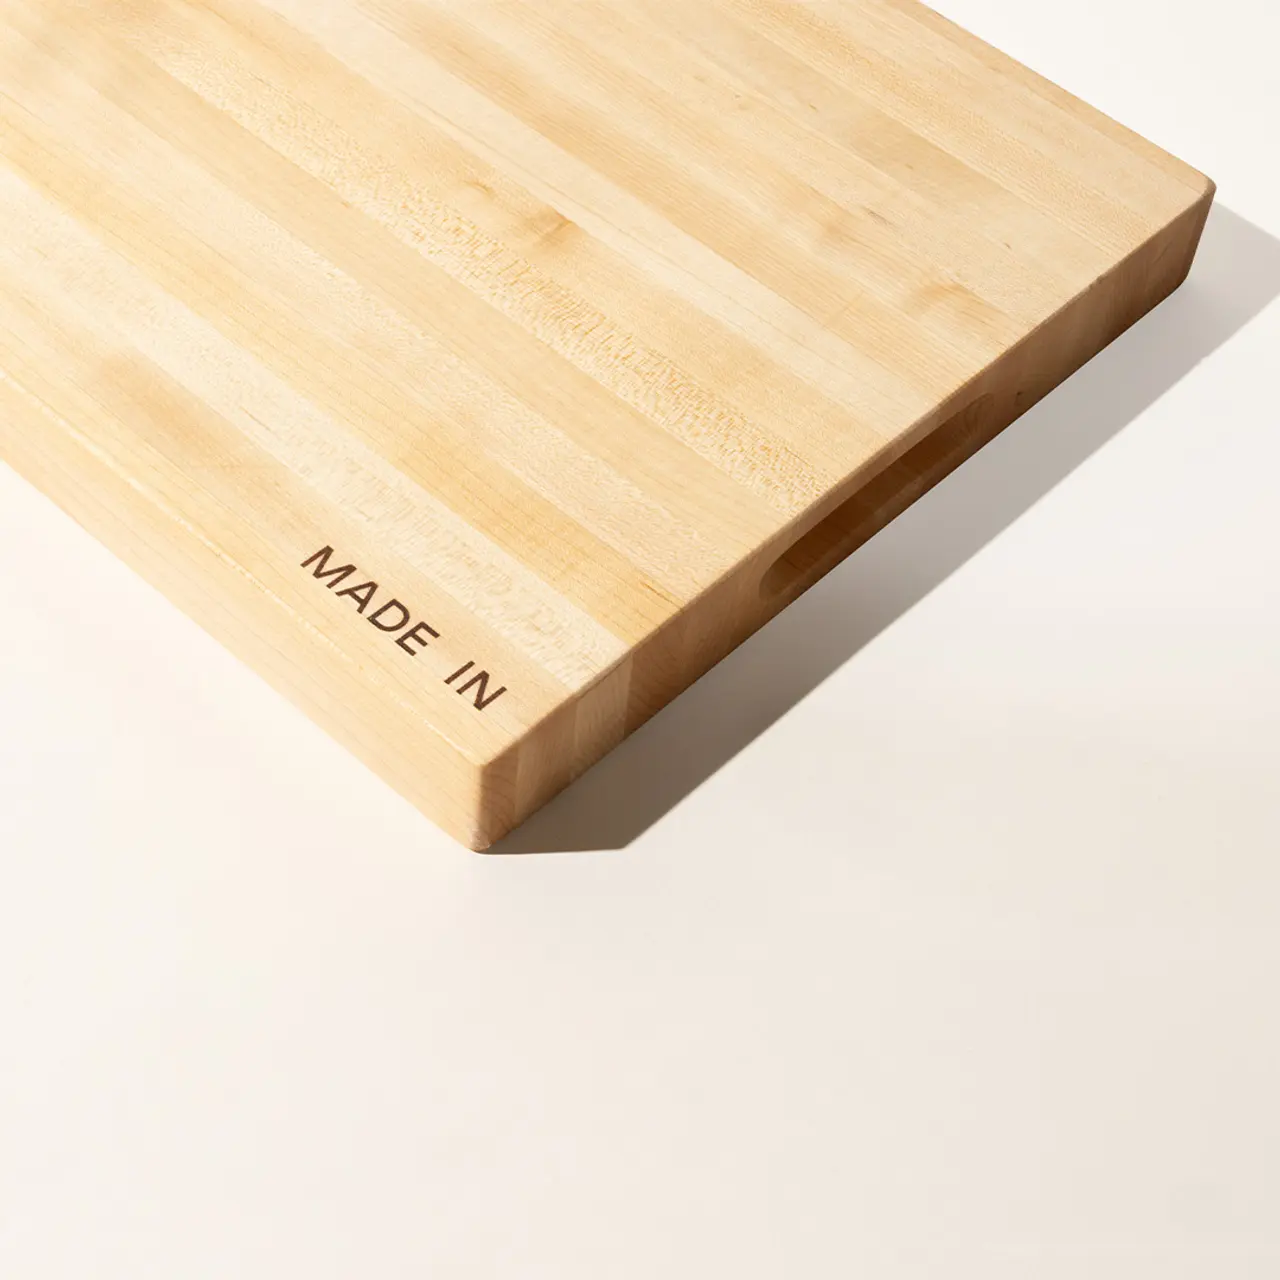 A close-up of a wooden board with "MADE IN" stamped on one corner, against a white background.